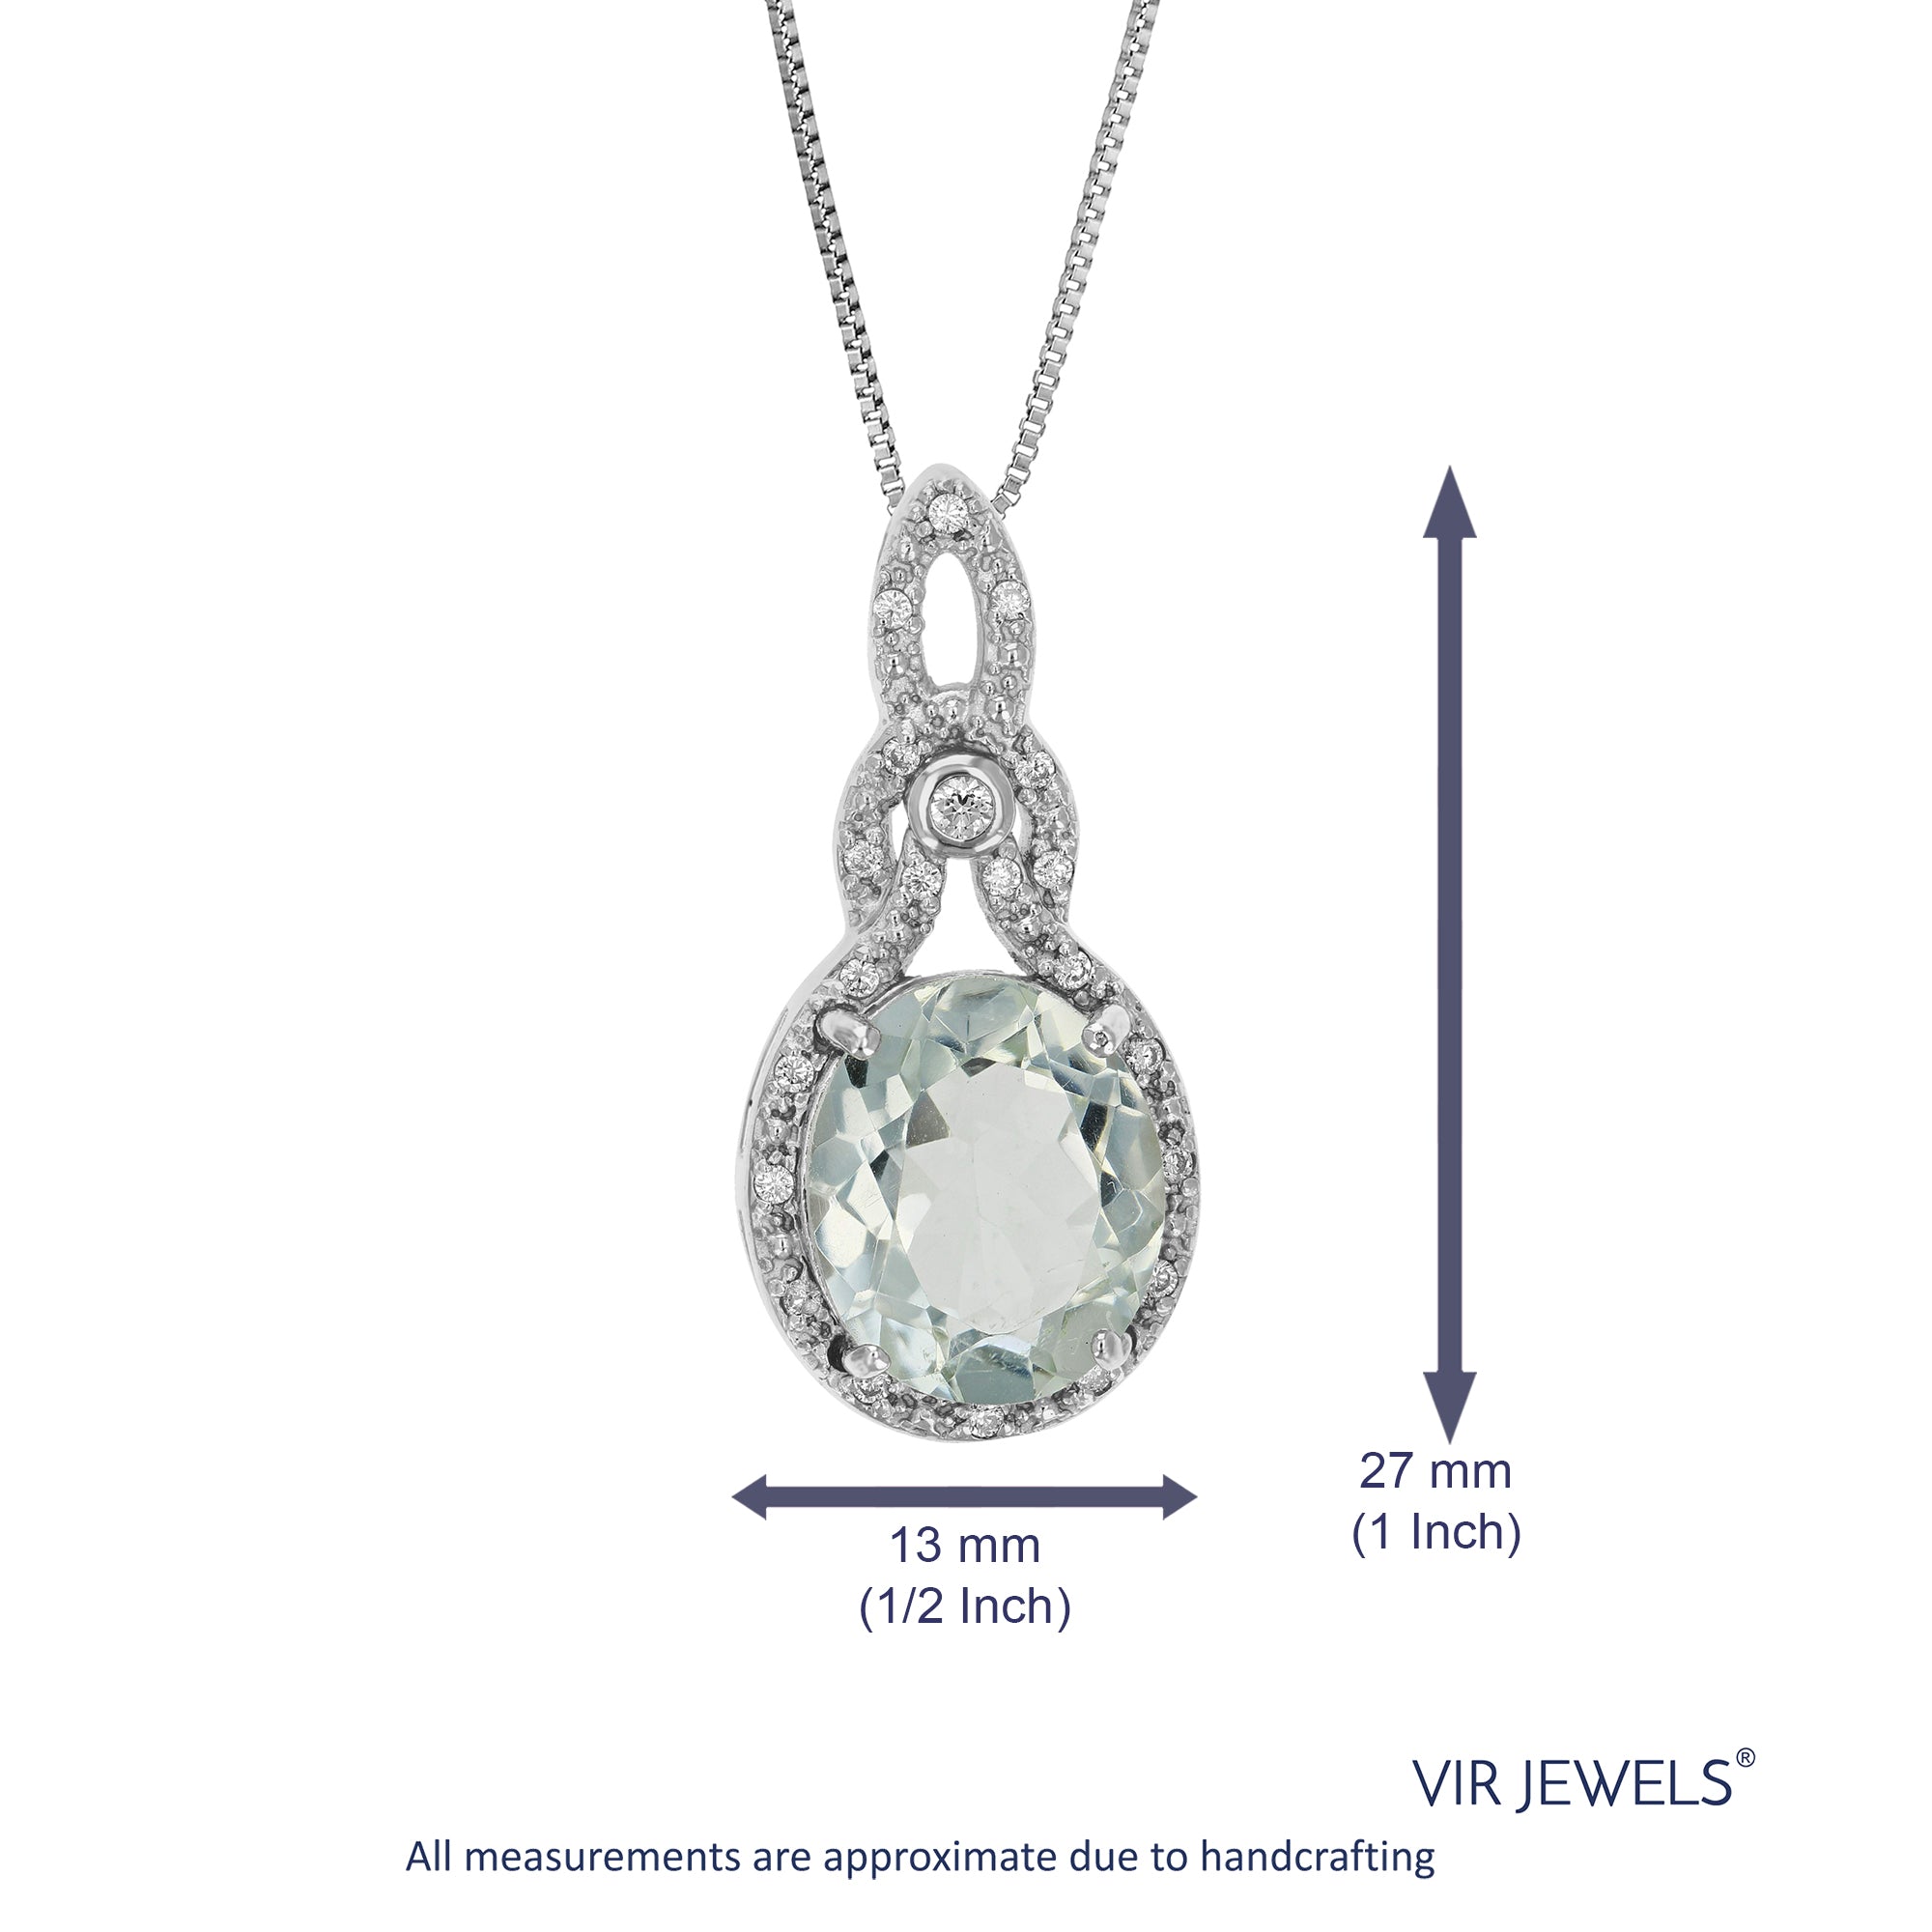 2.80 cttw Pendant Necklace, Green Amethyst Oval Shape Pendant Necklace for Women in .925 Sterling Silver with Rhodium, 18 Inch Chain, Prong Setting